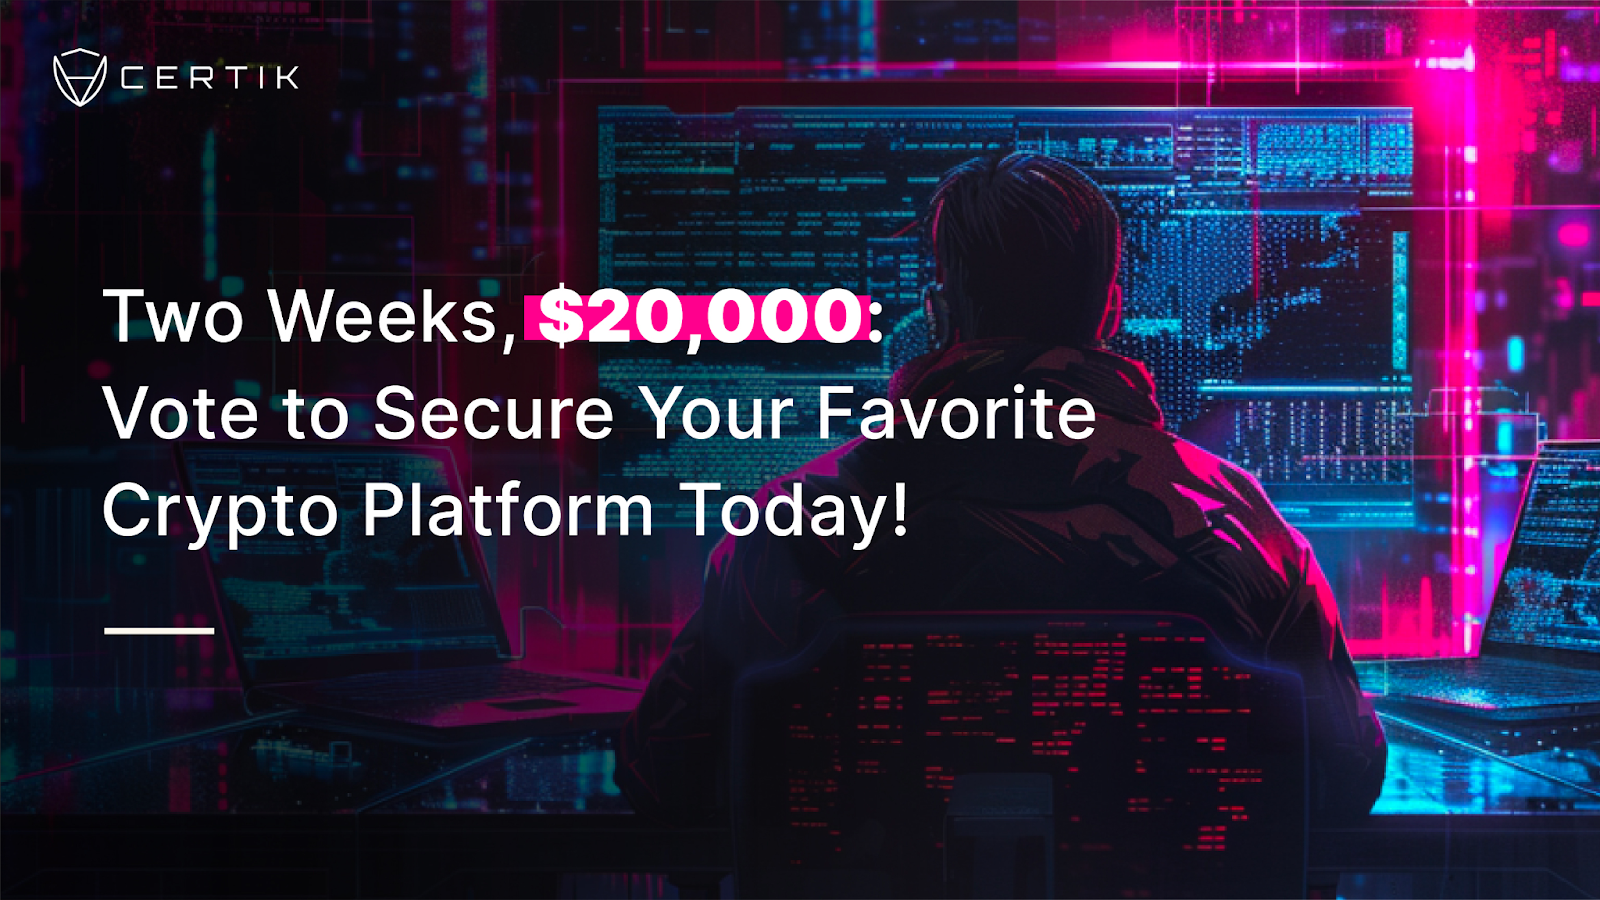 Two Weeks, $20,000: Vote to Secure Your Favorite Crypto Platform Today!